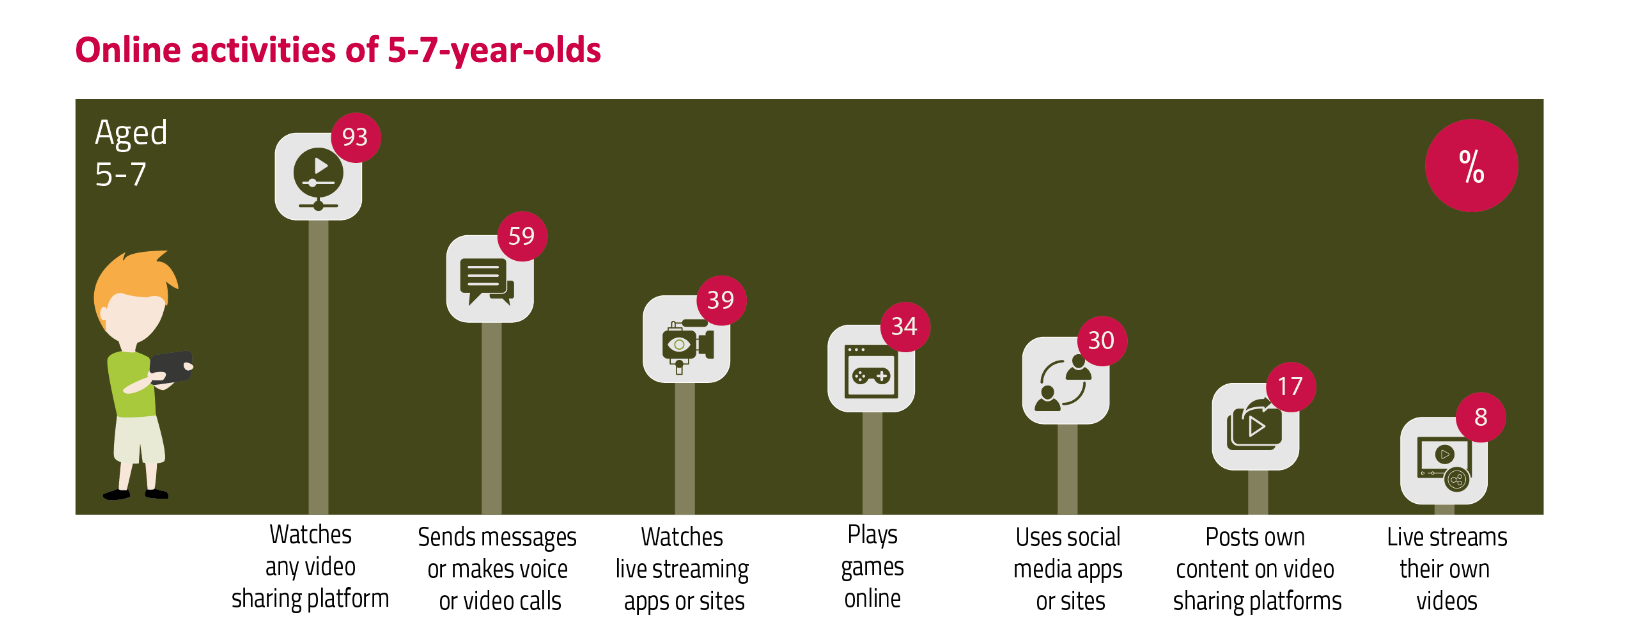 Chart of screen activities for 5-7 year olds.